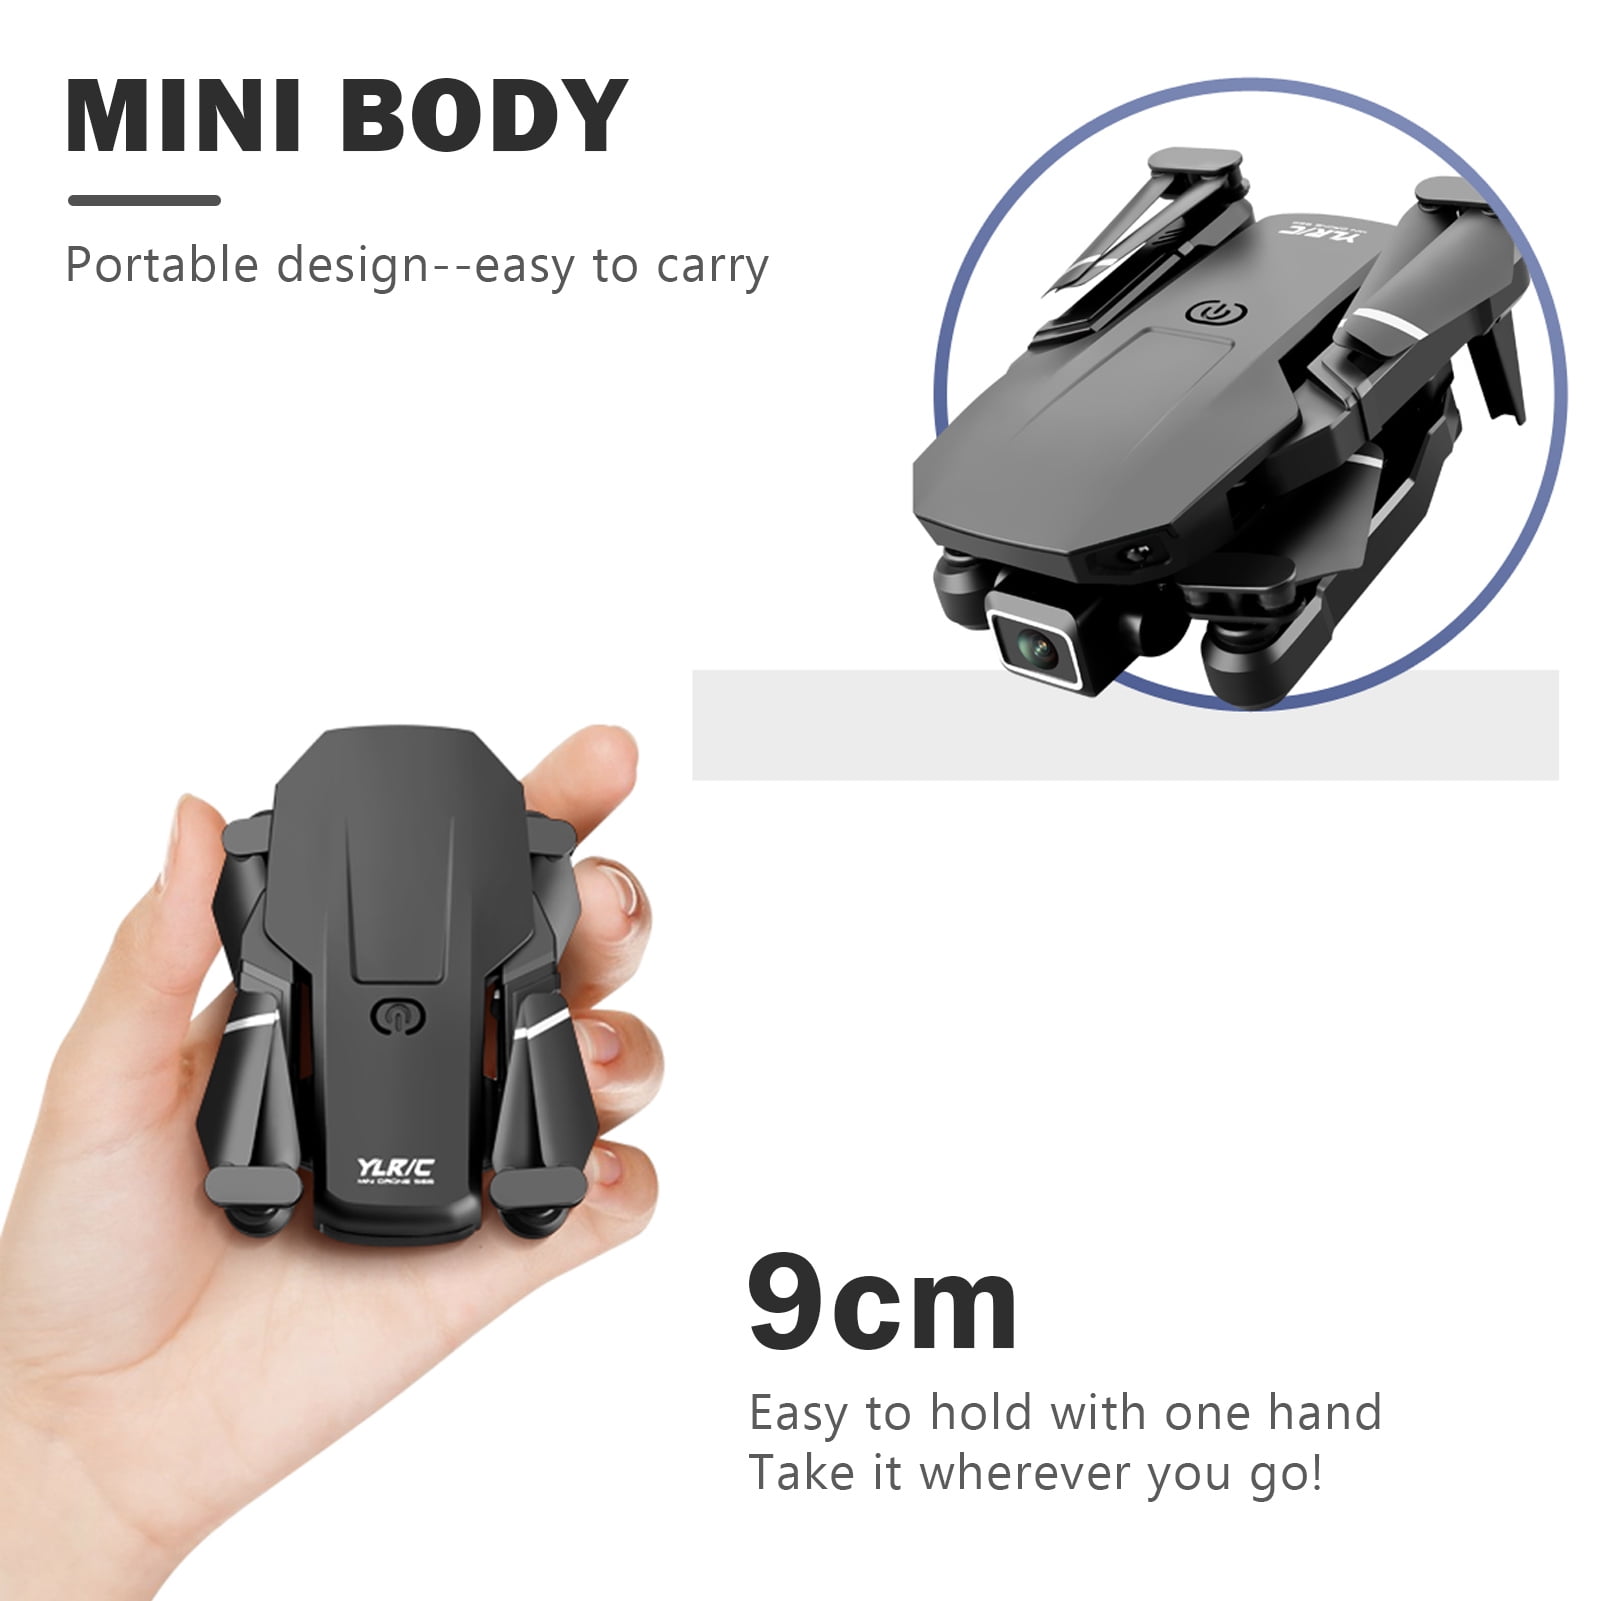 Details about   Drone MINI Foldable G-sensor with FPV Camera WIFI RC Quadcopter HD Selfie Toys